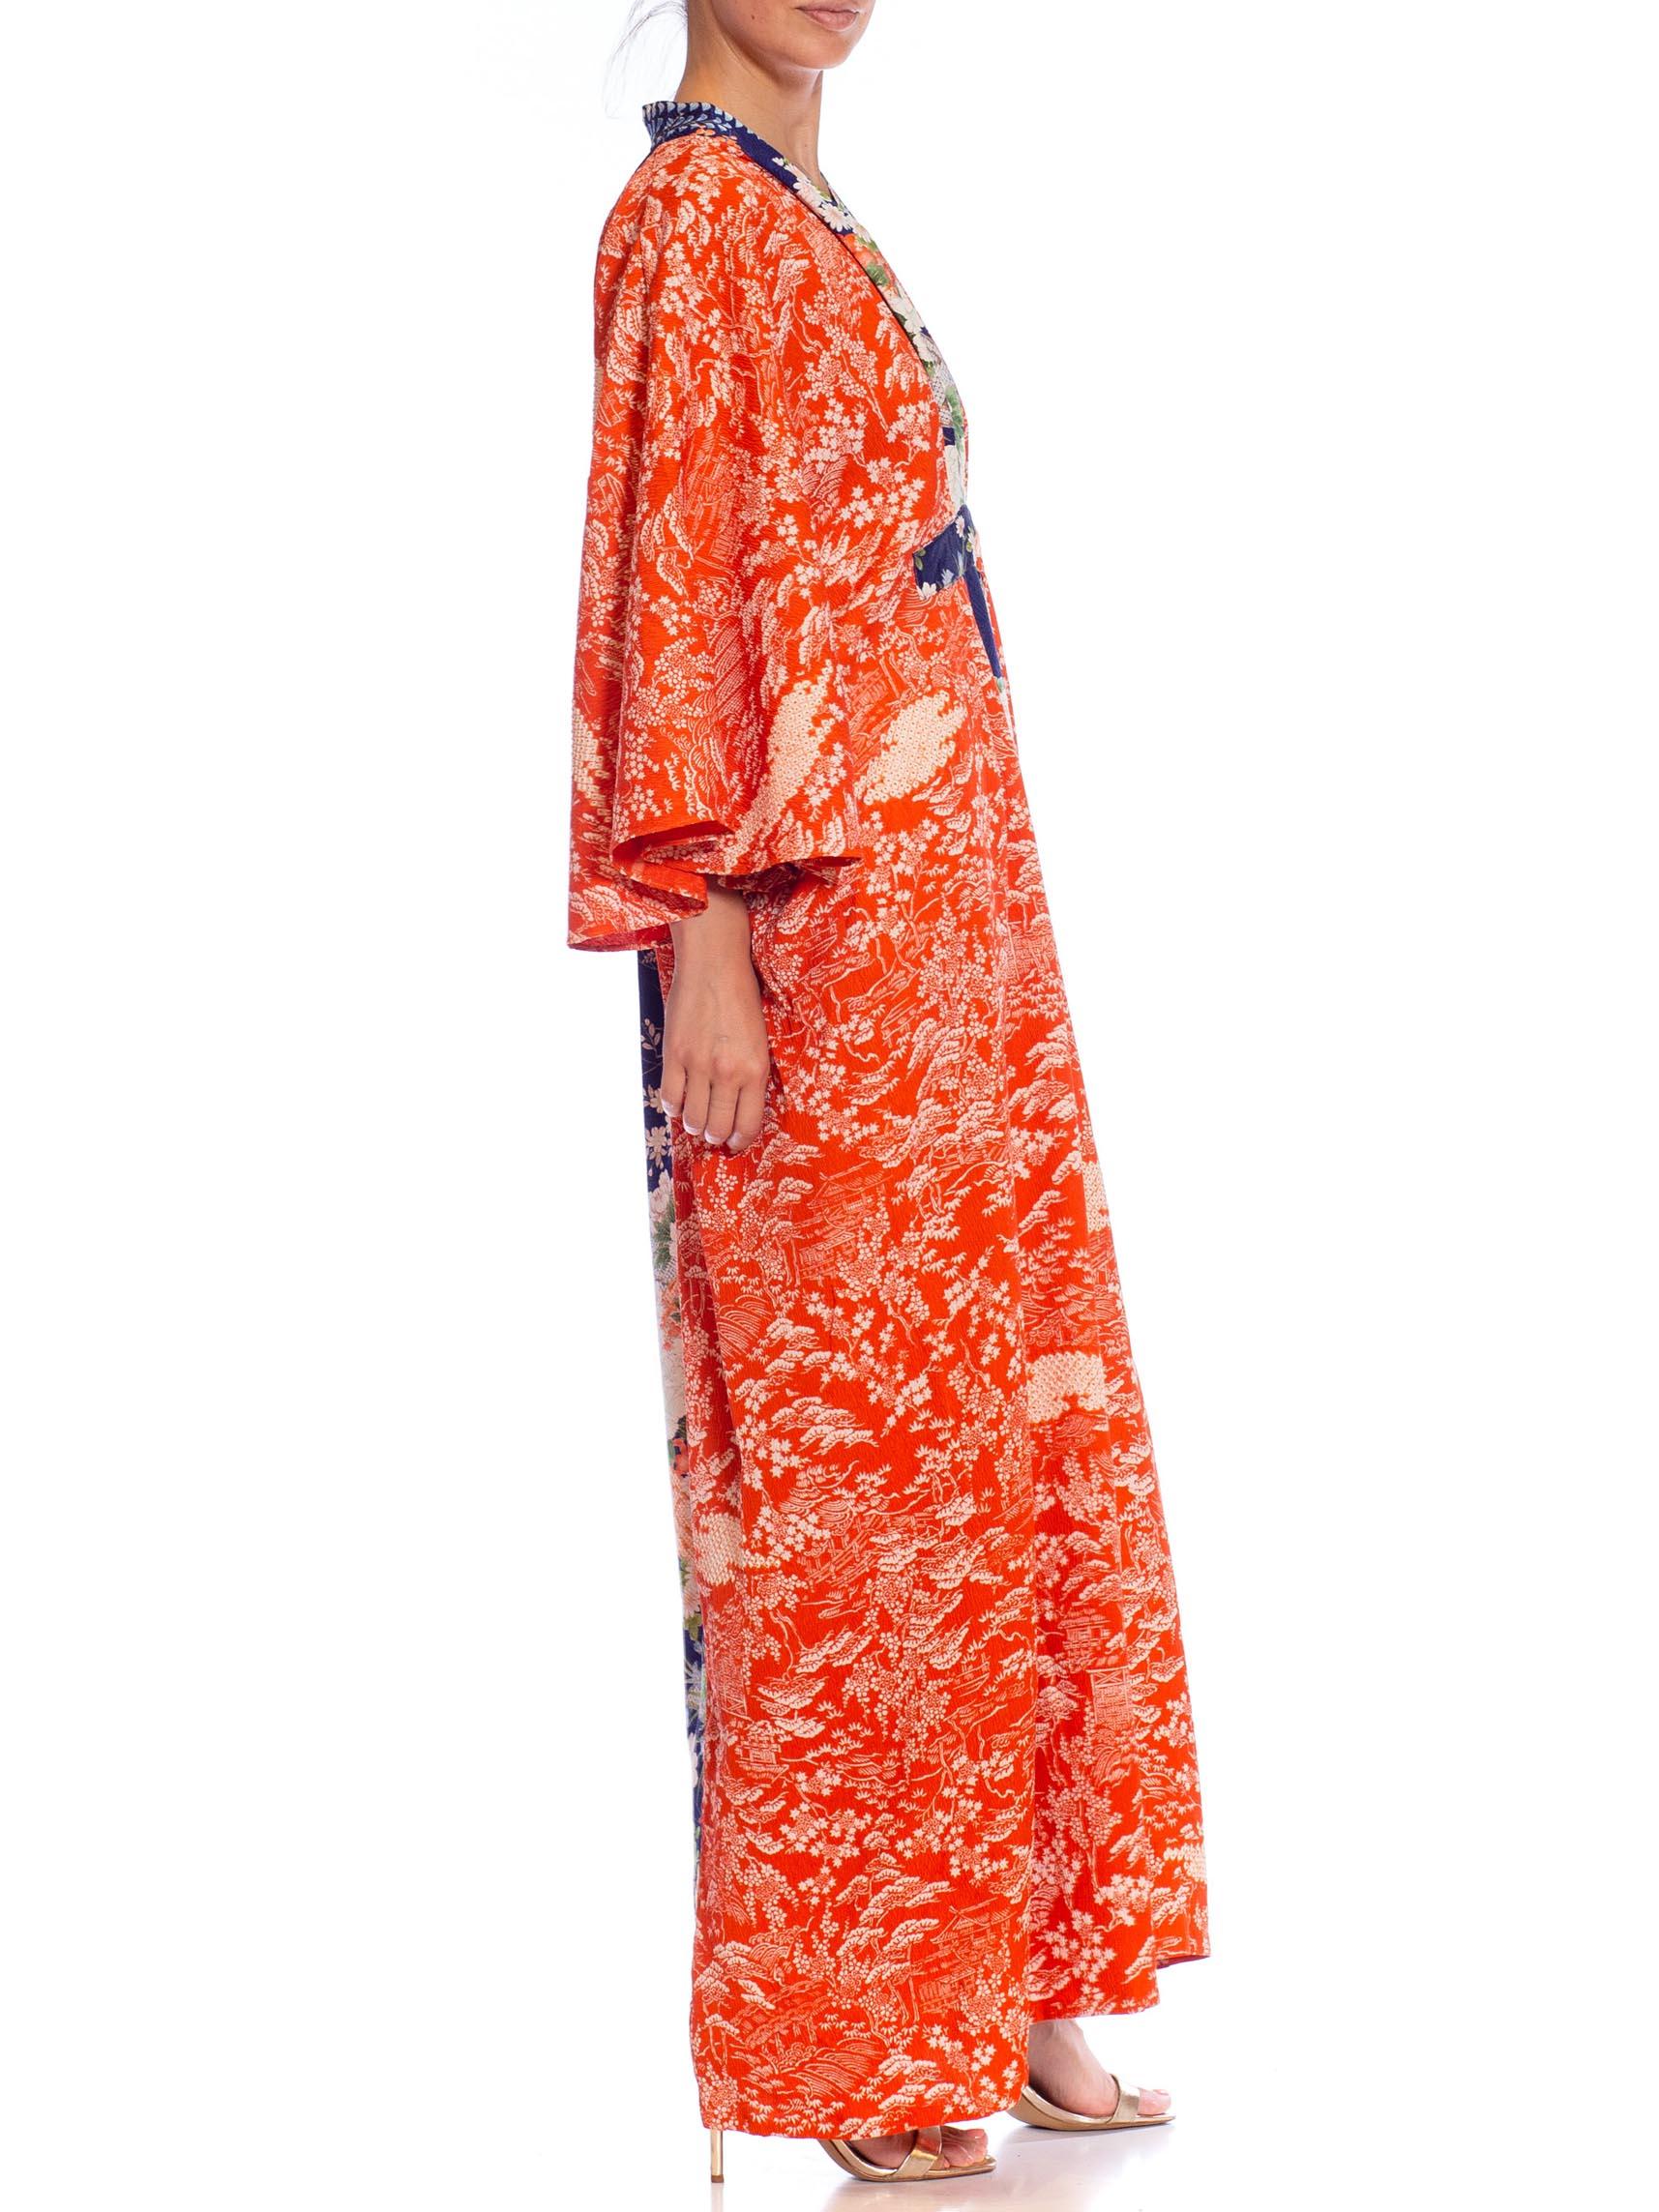 MORPHEW COLLECTION Golden Orange & Blue Japanese Kimono Silk Kaftan In Excellent Condition For Sale In New York, NY